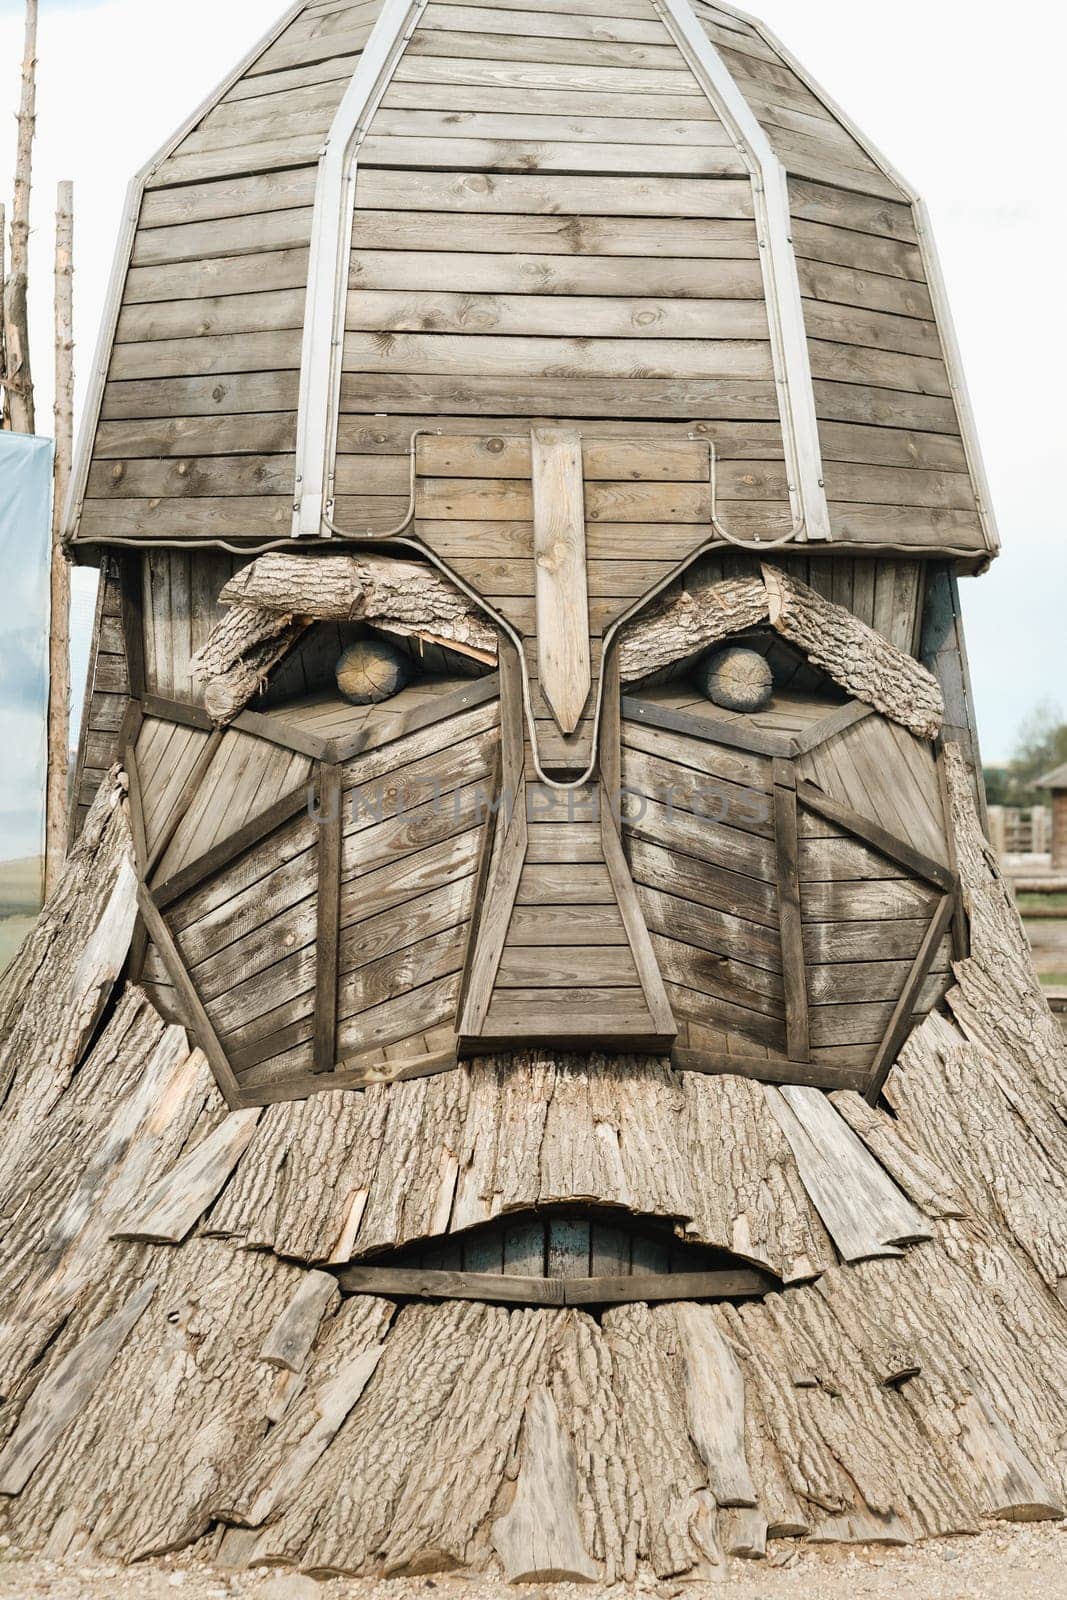 The big face of the wooden sculpture of the hero.